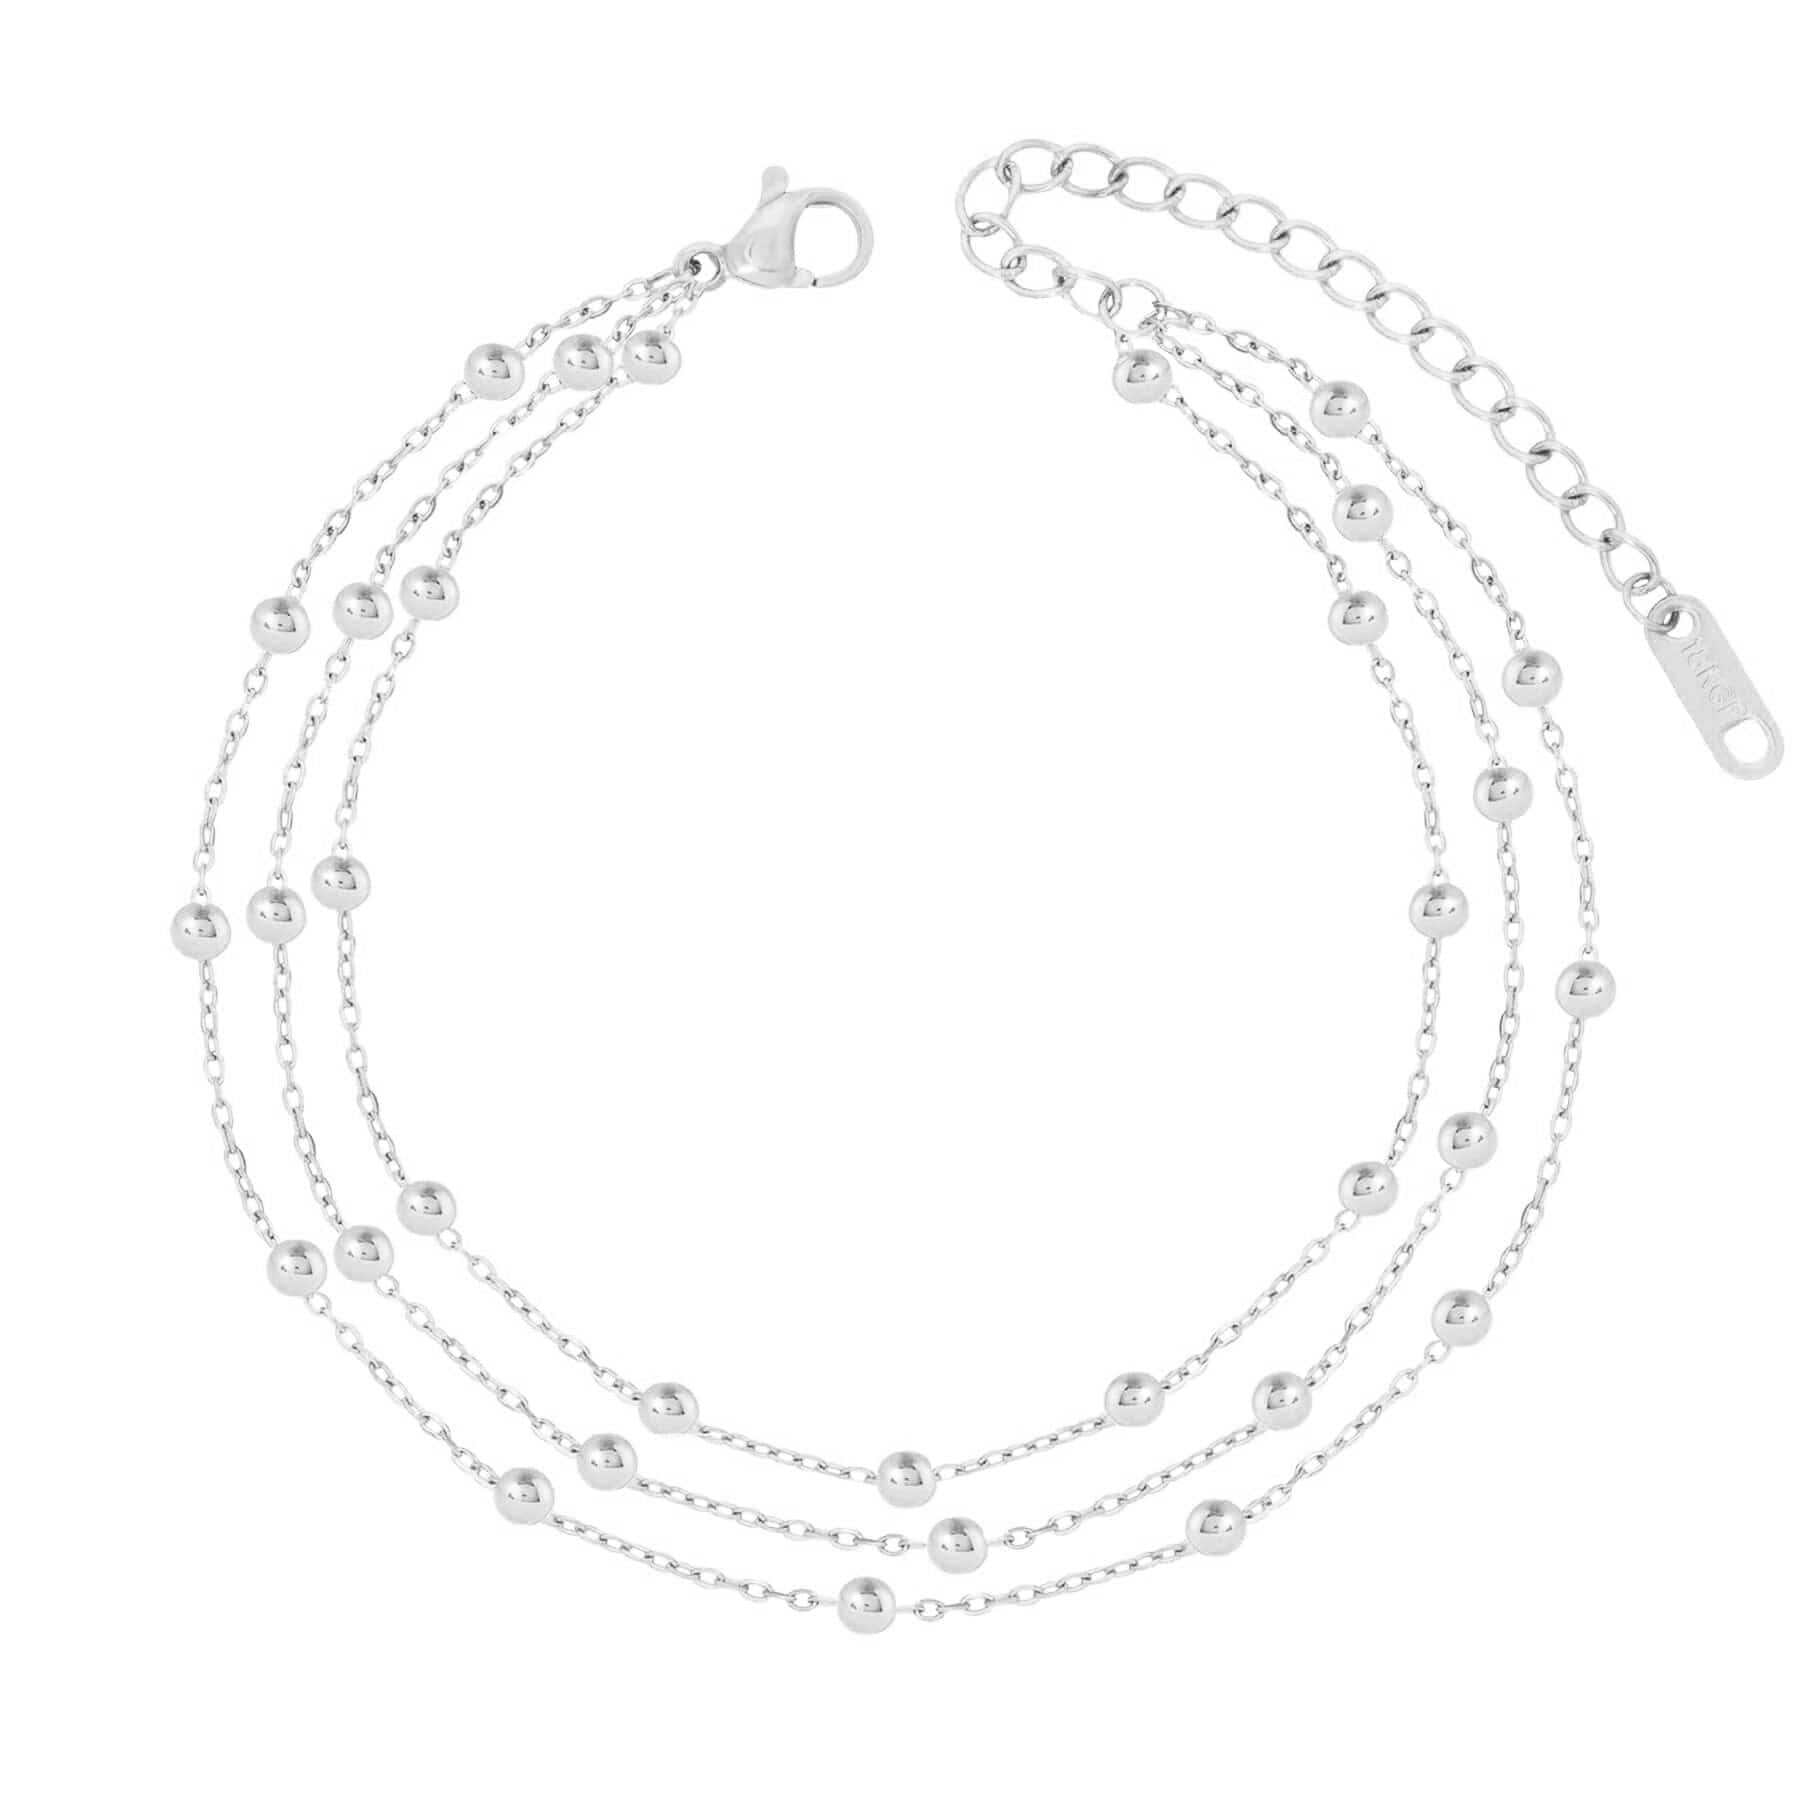 BohoMoon Stainless Steel Triple Ball Anklet Silver